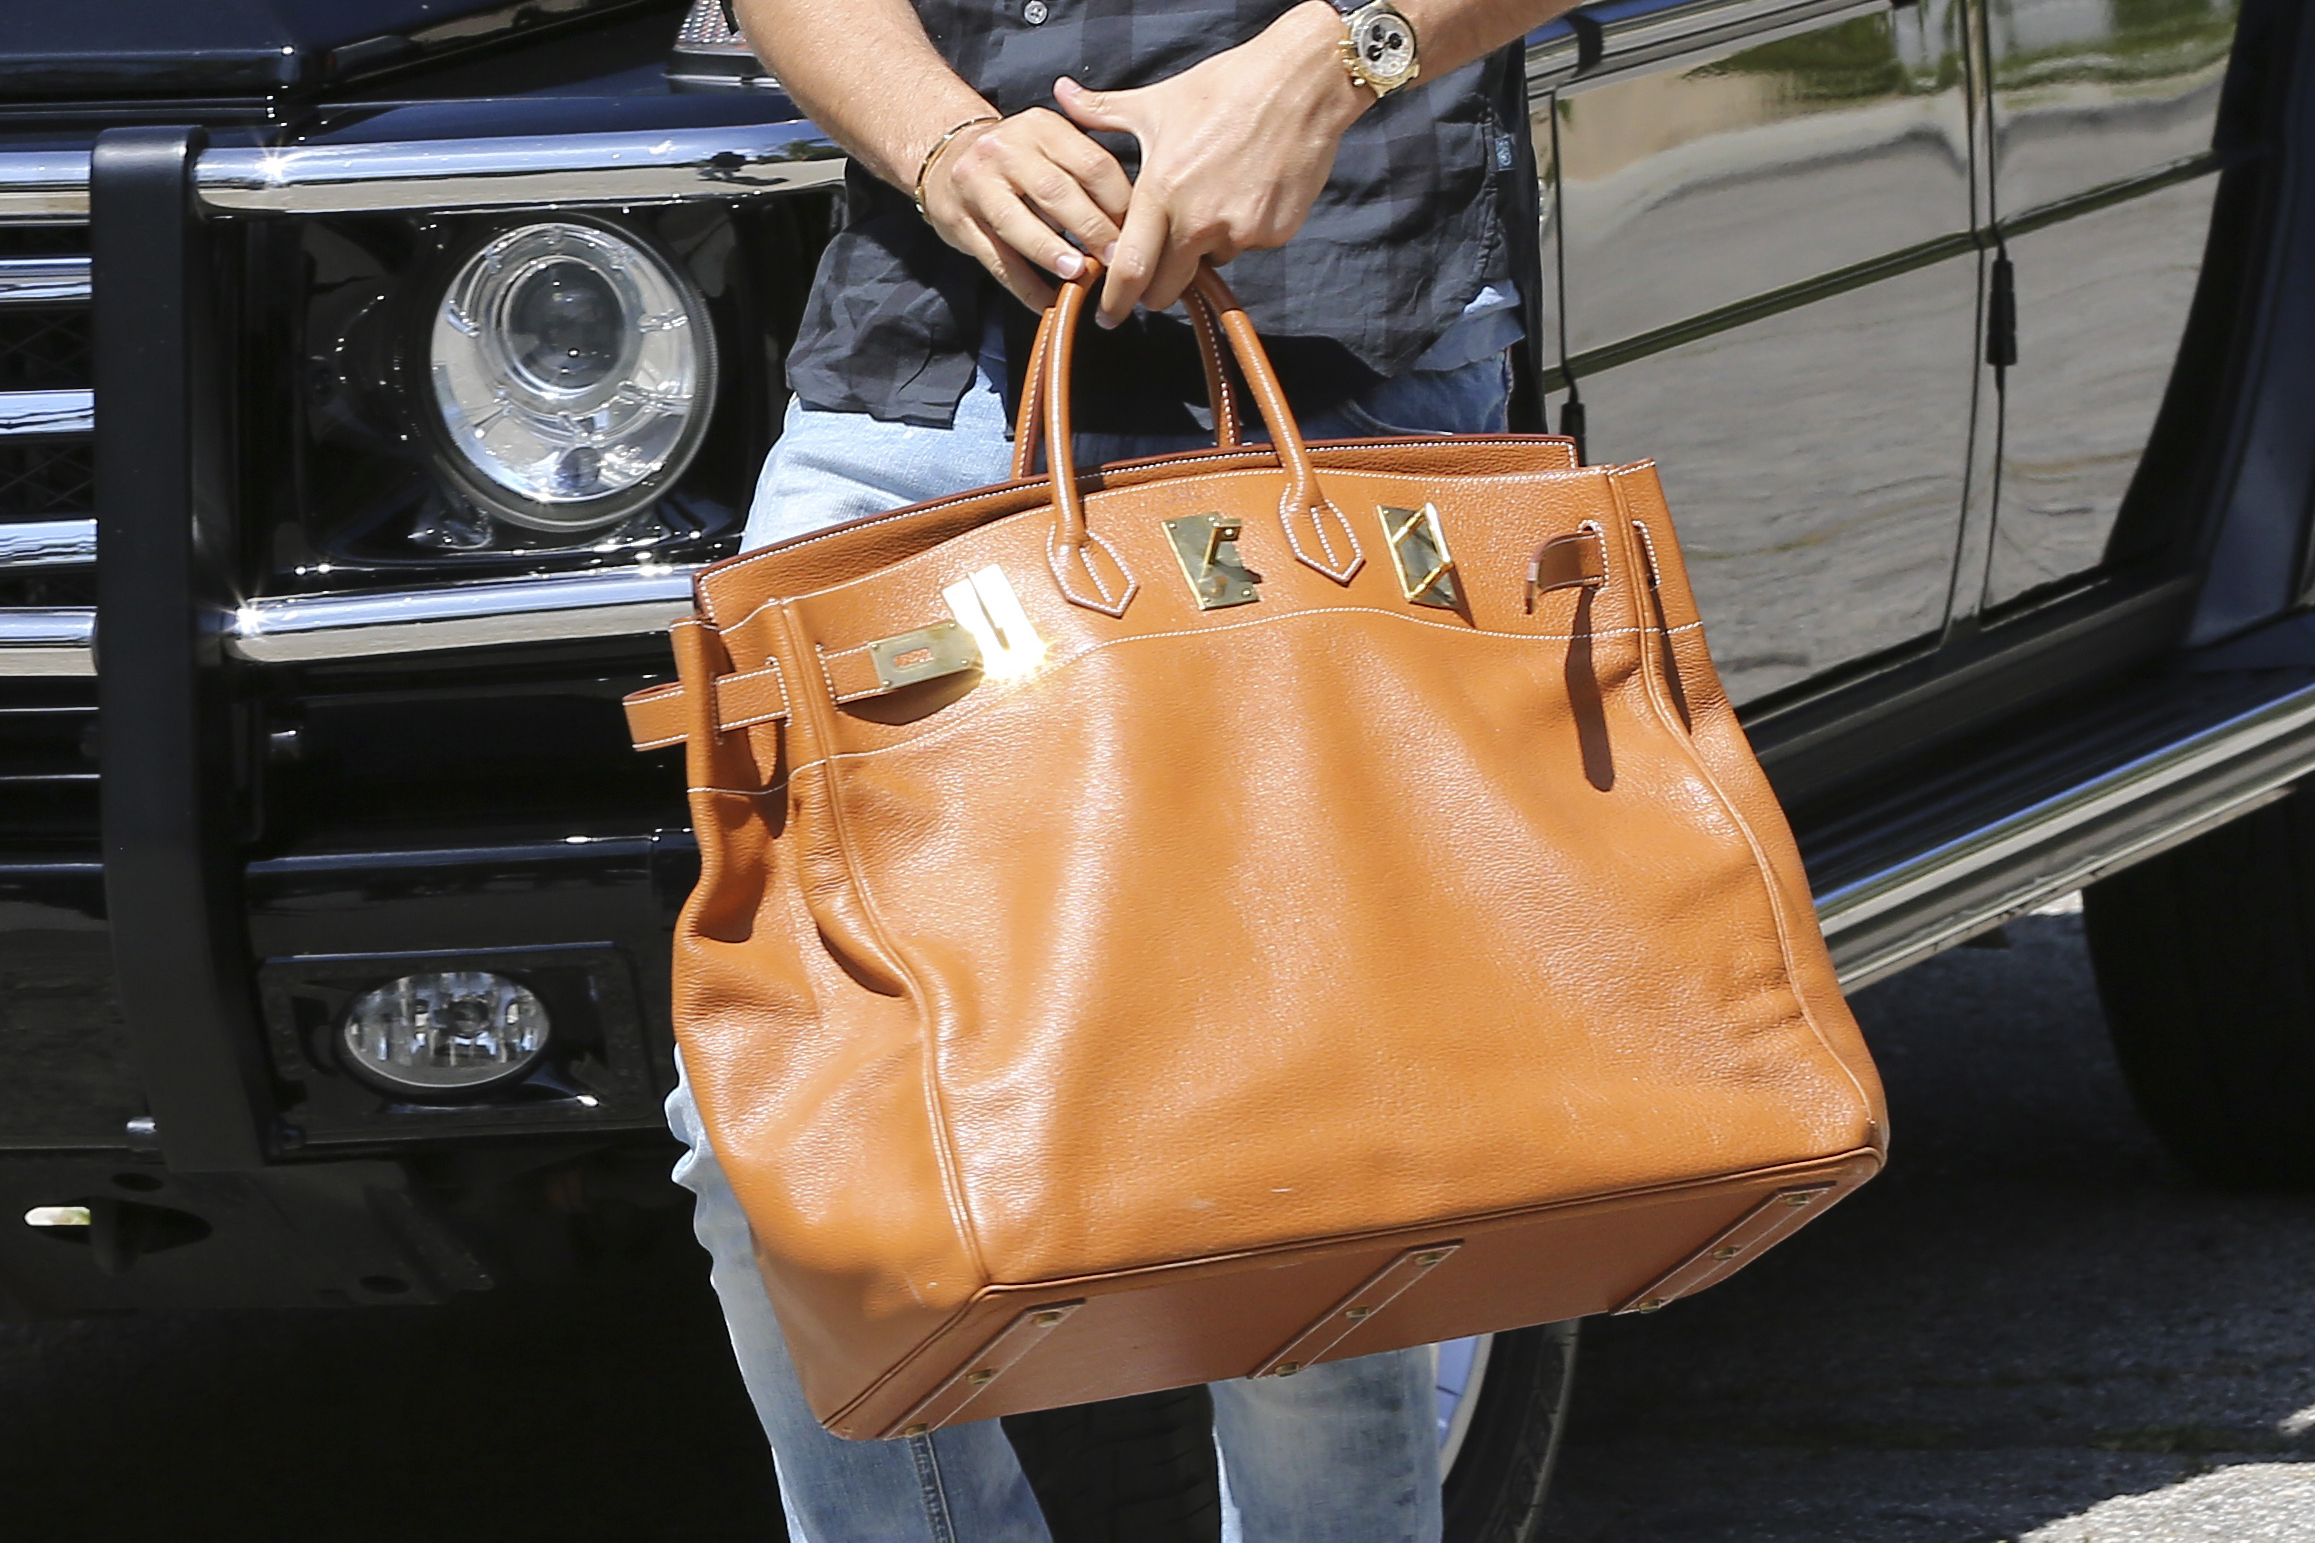 Beverly Hills, CA - Part 2 - Scott Disick arrives at Kim Kardashian's house in Beverly Hills this afternoon, toting around a brown Hermes Birkin bag.  Scott was dressed casual in a plaid shirt with distressed jeans.  The reality star was out without long-time beau, Kourtney Kardashian amidst recent rumors that Scott may not be Mason's biological father.  
           April 4, 2013,Image: 157874401, License: Rights-managed, Restrictions: World Rights,World Rights, Model Release: no, Pictured: Scott Disick